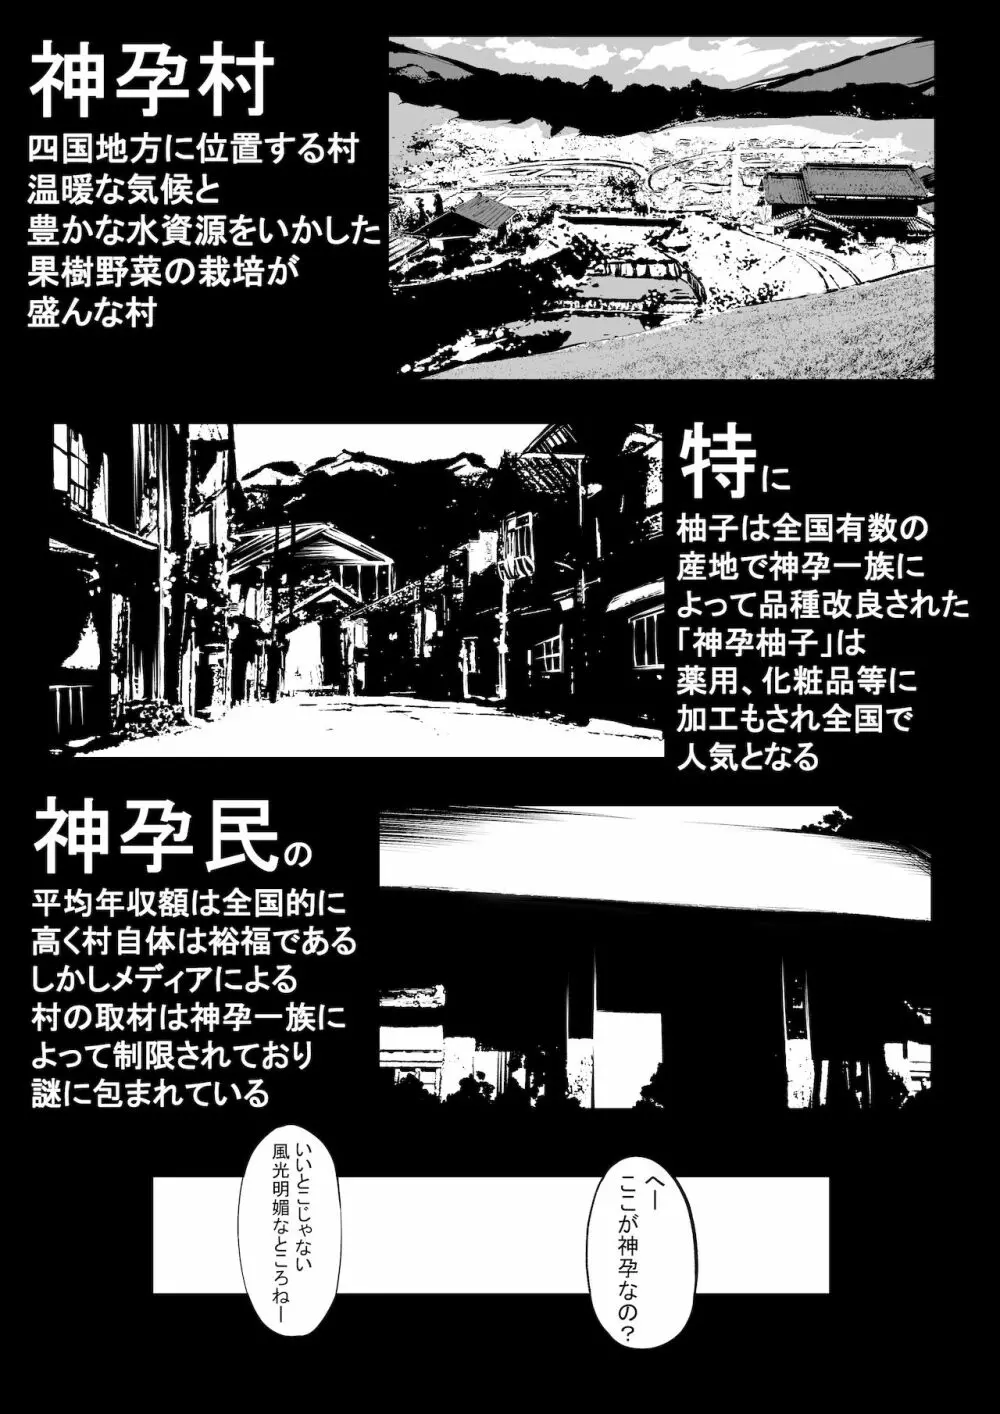 The 神孕村～やっくをやっつけろの巻～ - page5